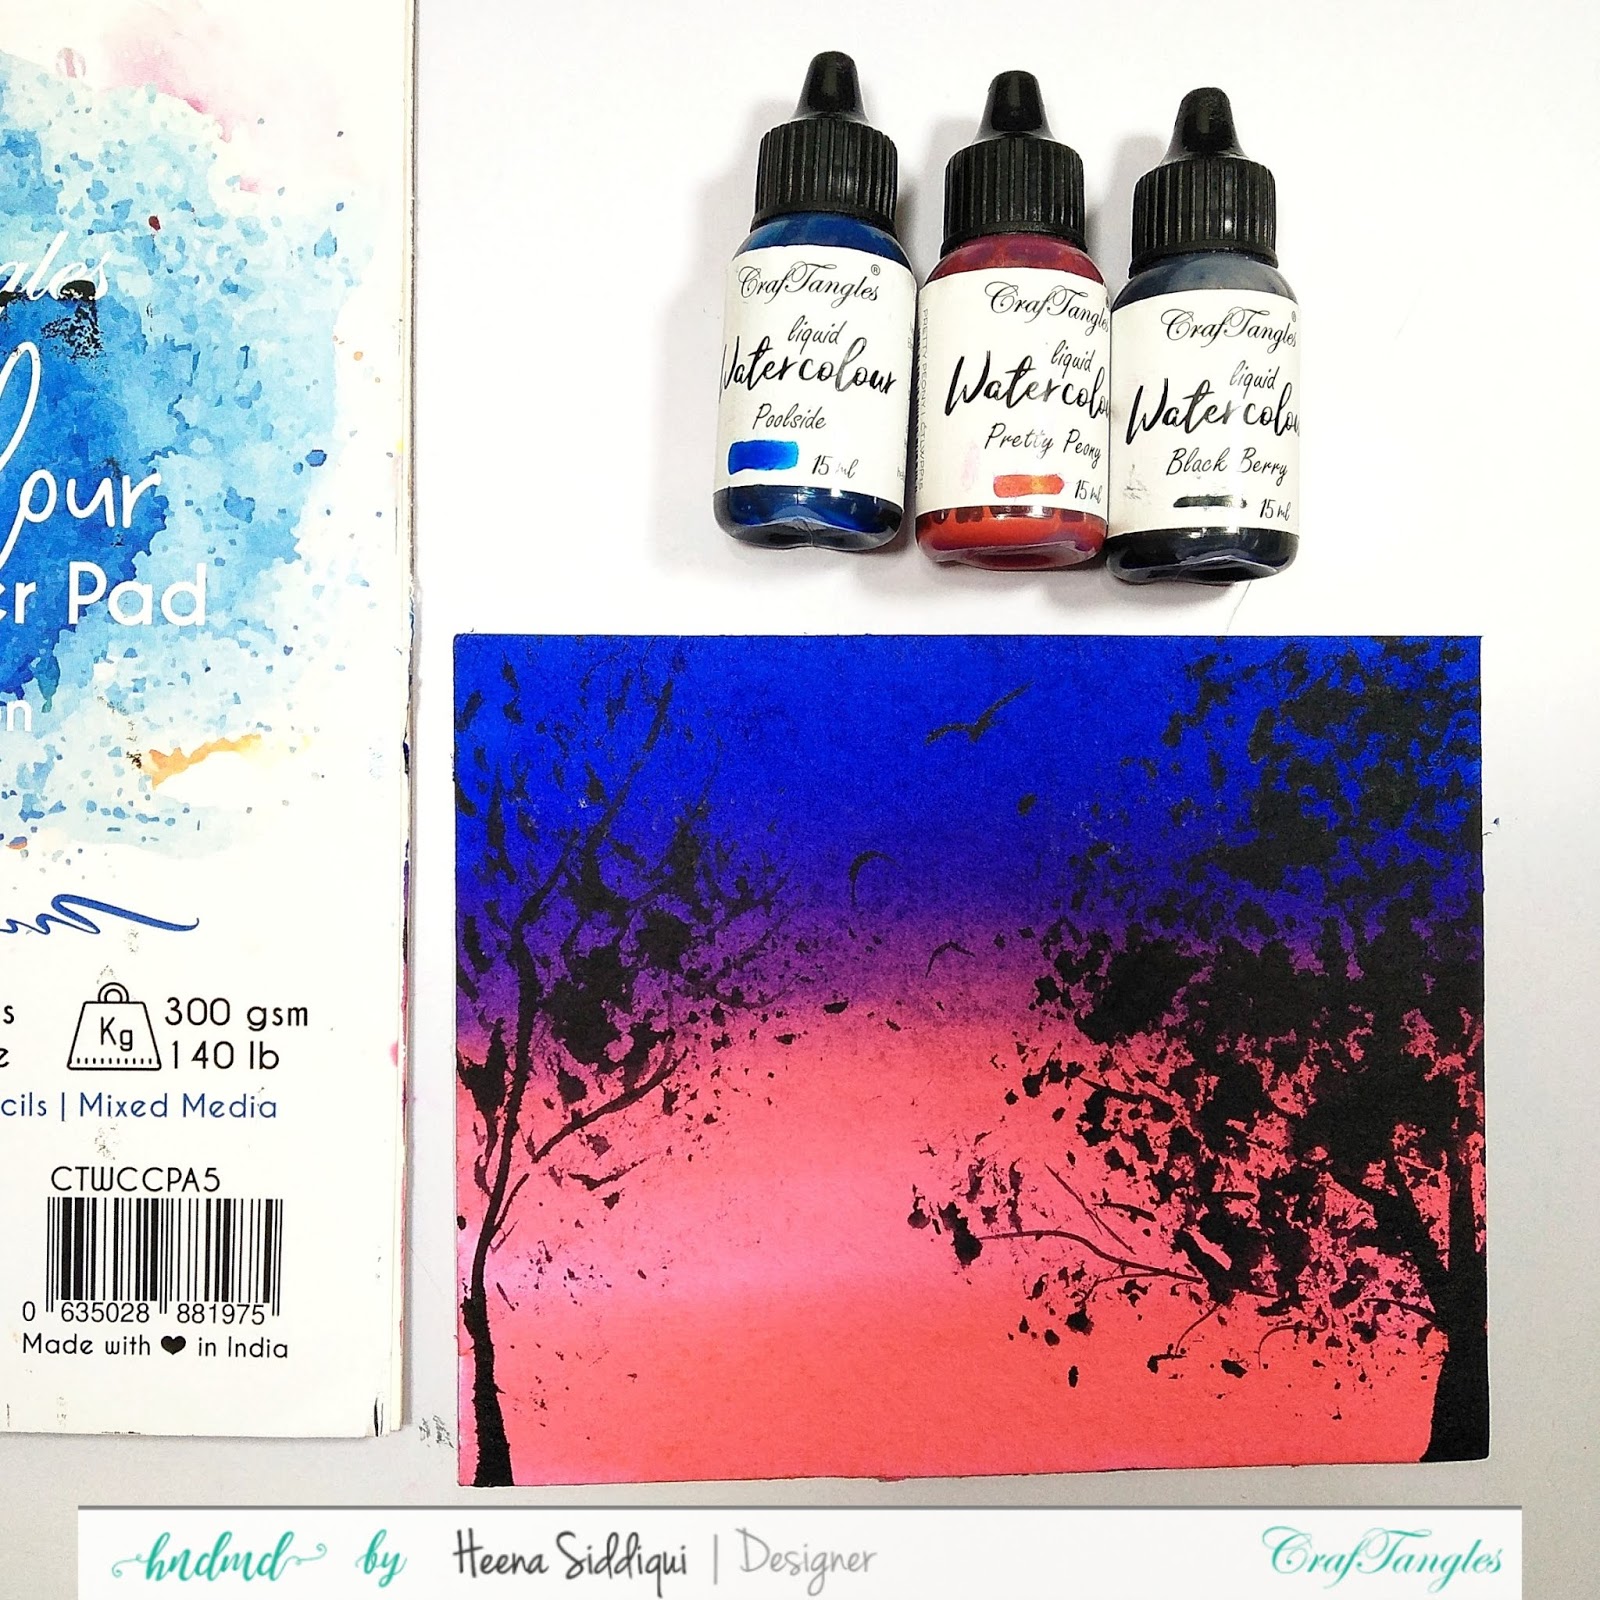 Video : Watercolor Masking with Silhouette Adhesive Stencil Sheets